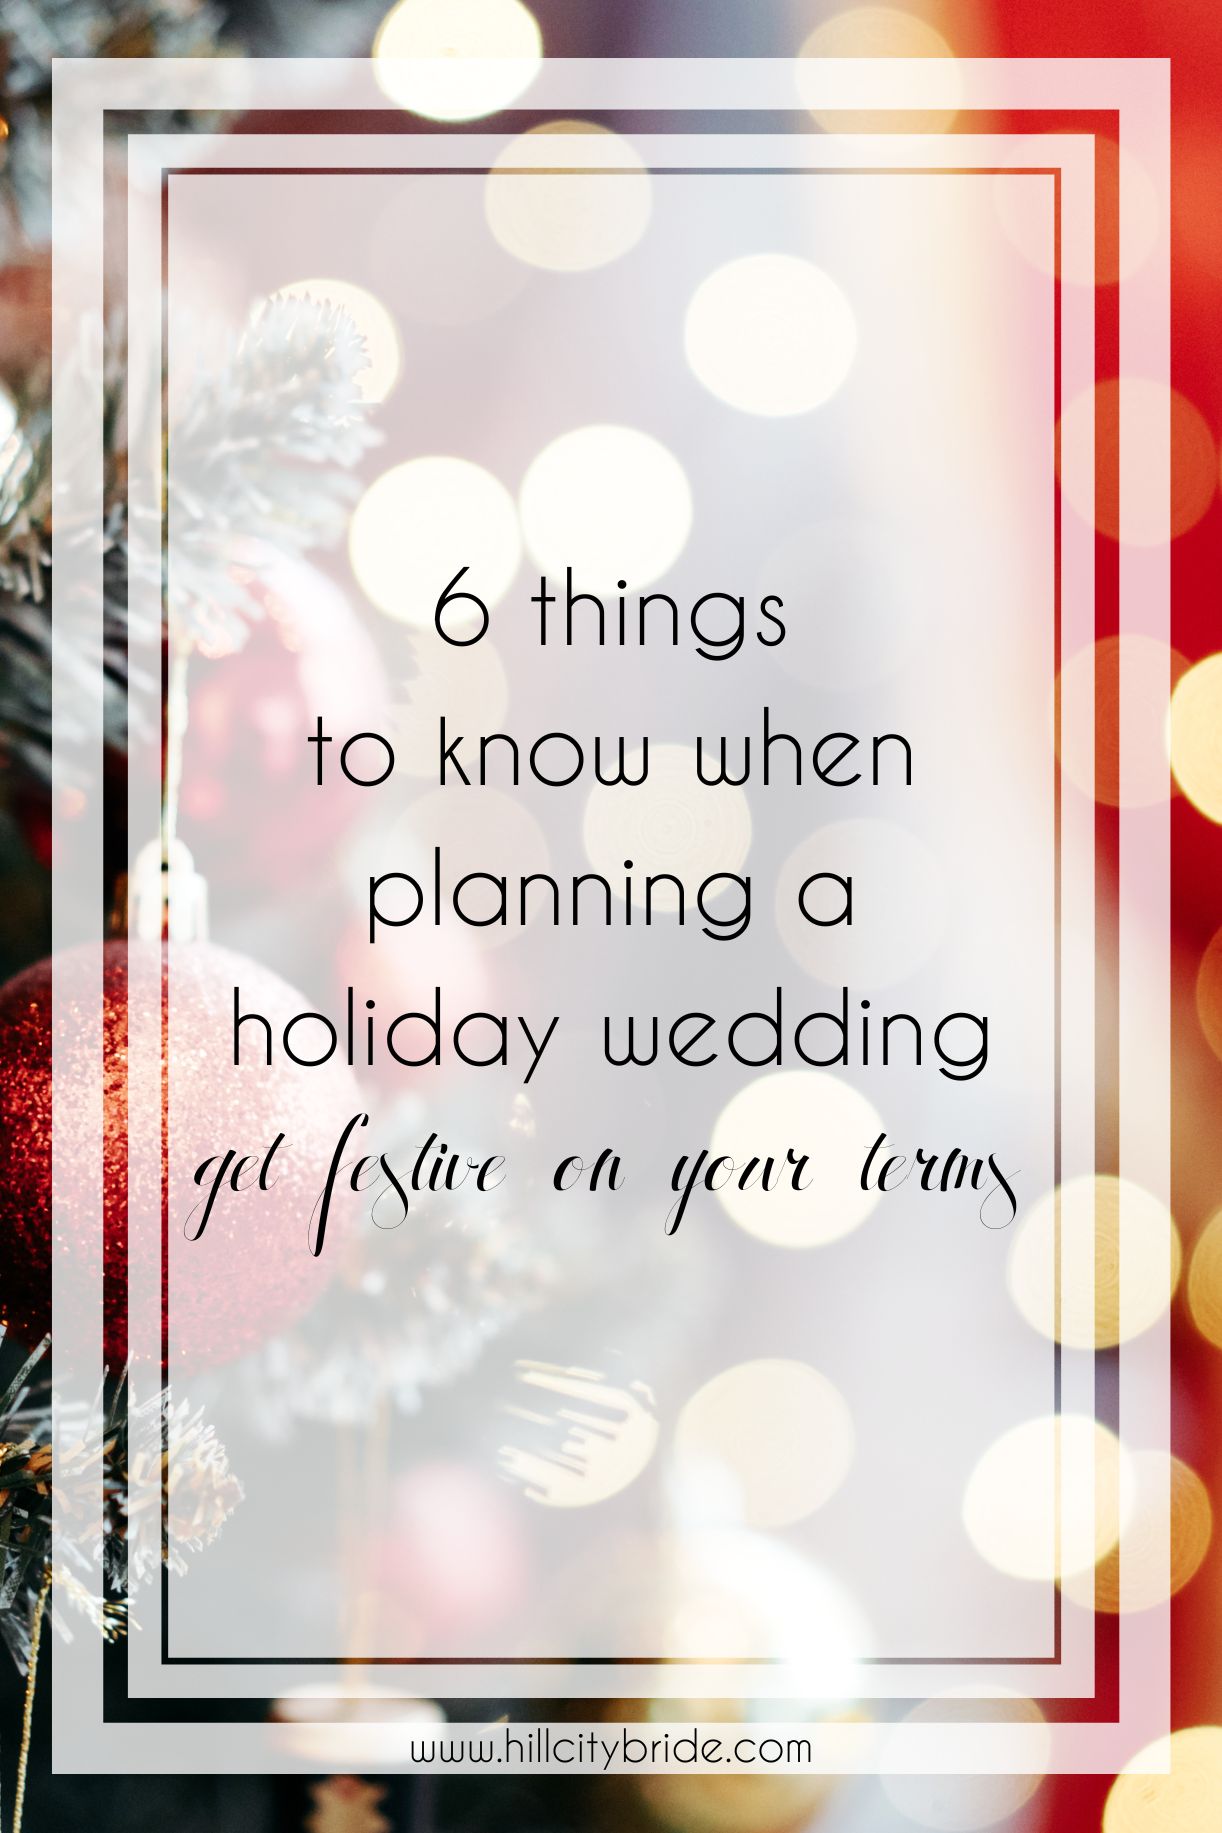 6 Fundamentals to Know When Planning a Holiday Wedding